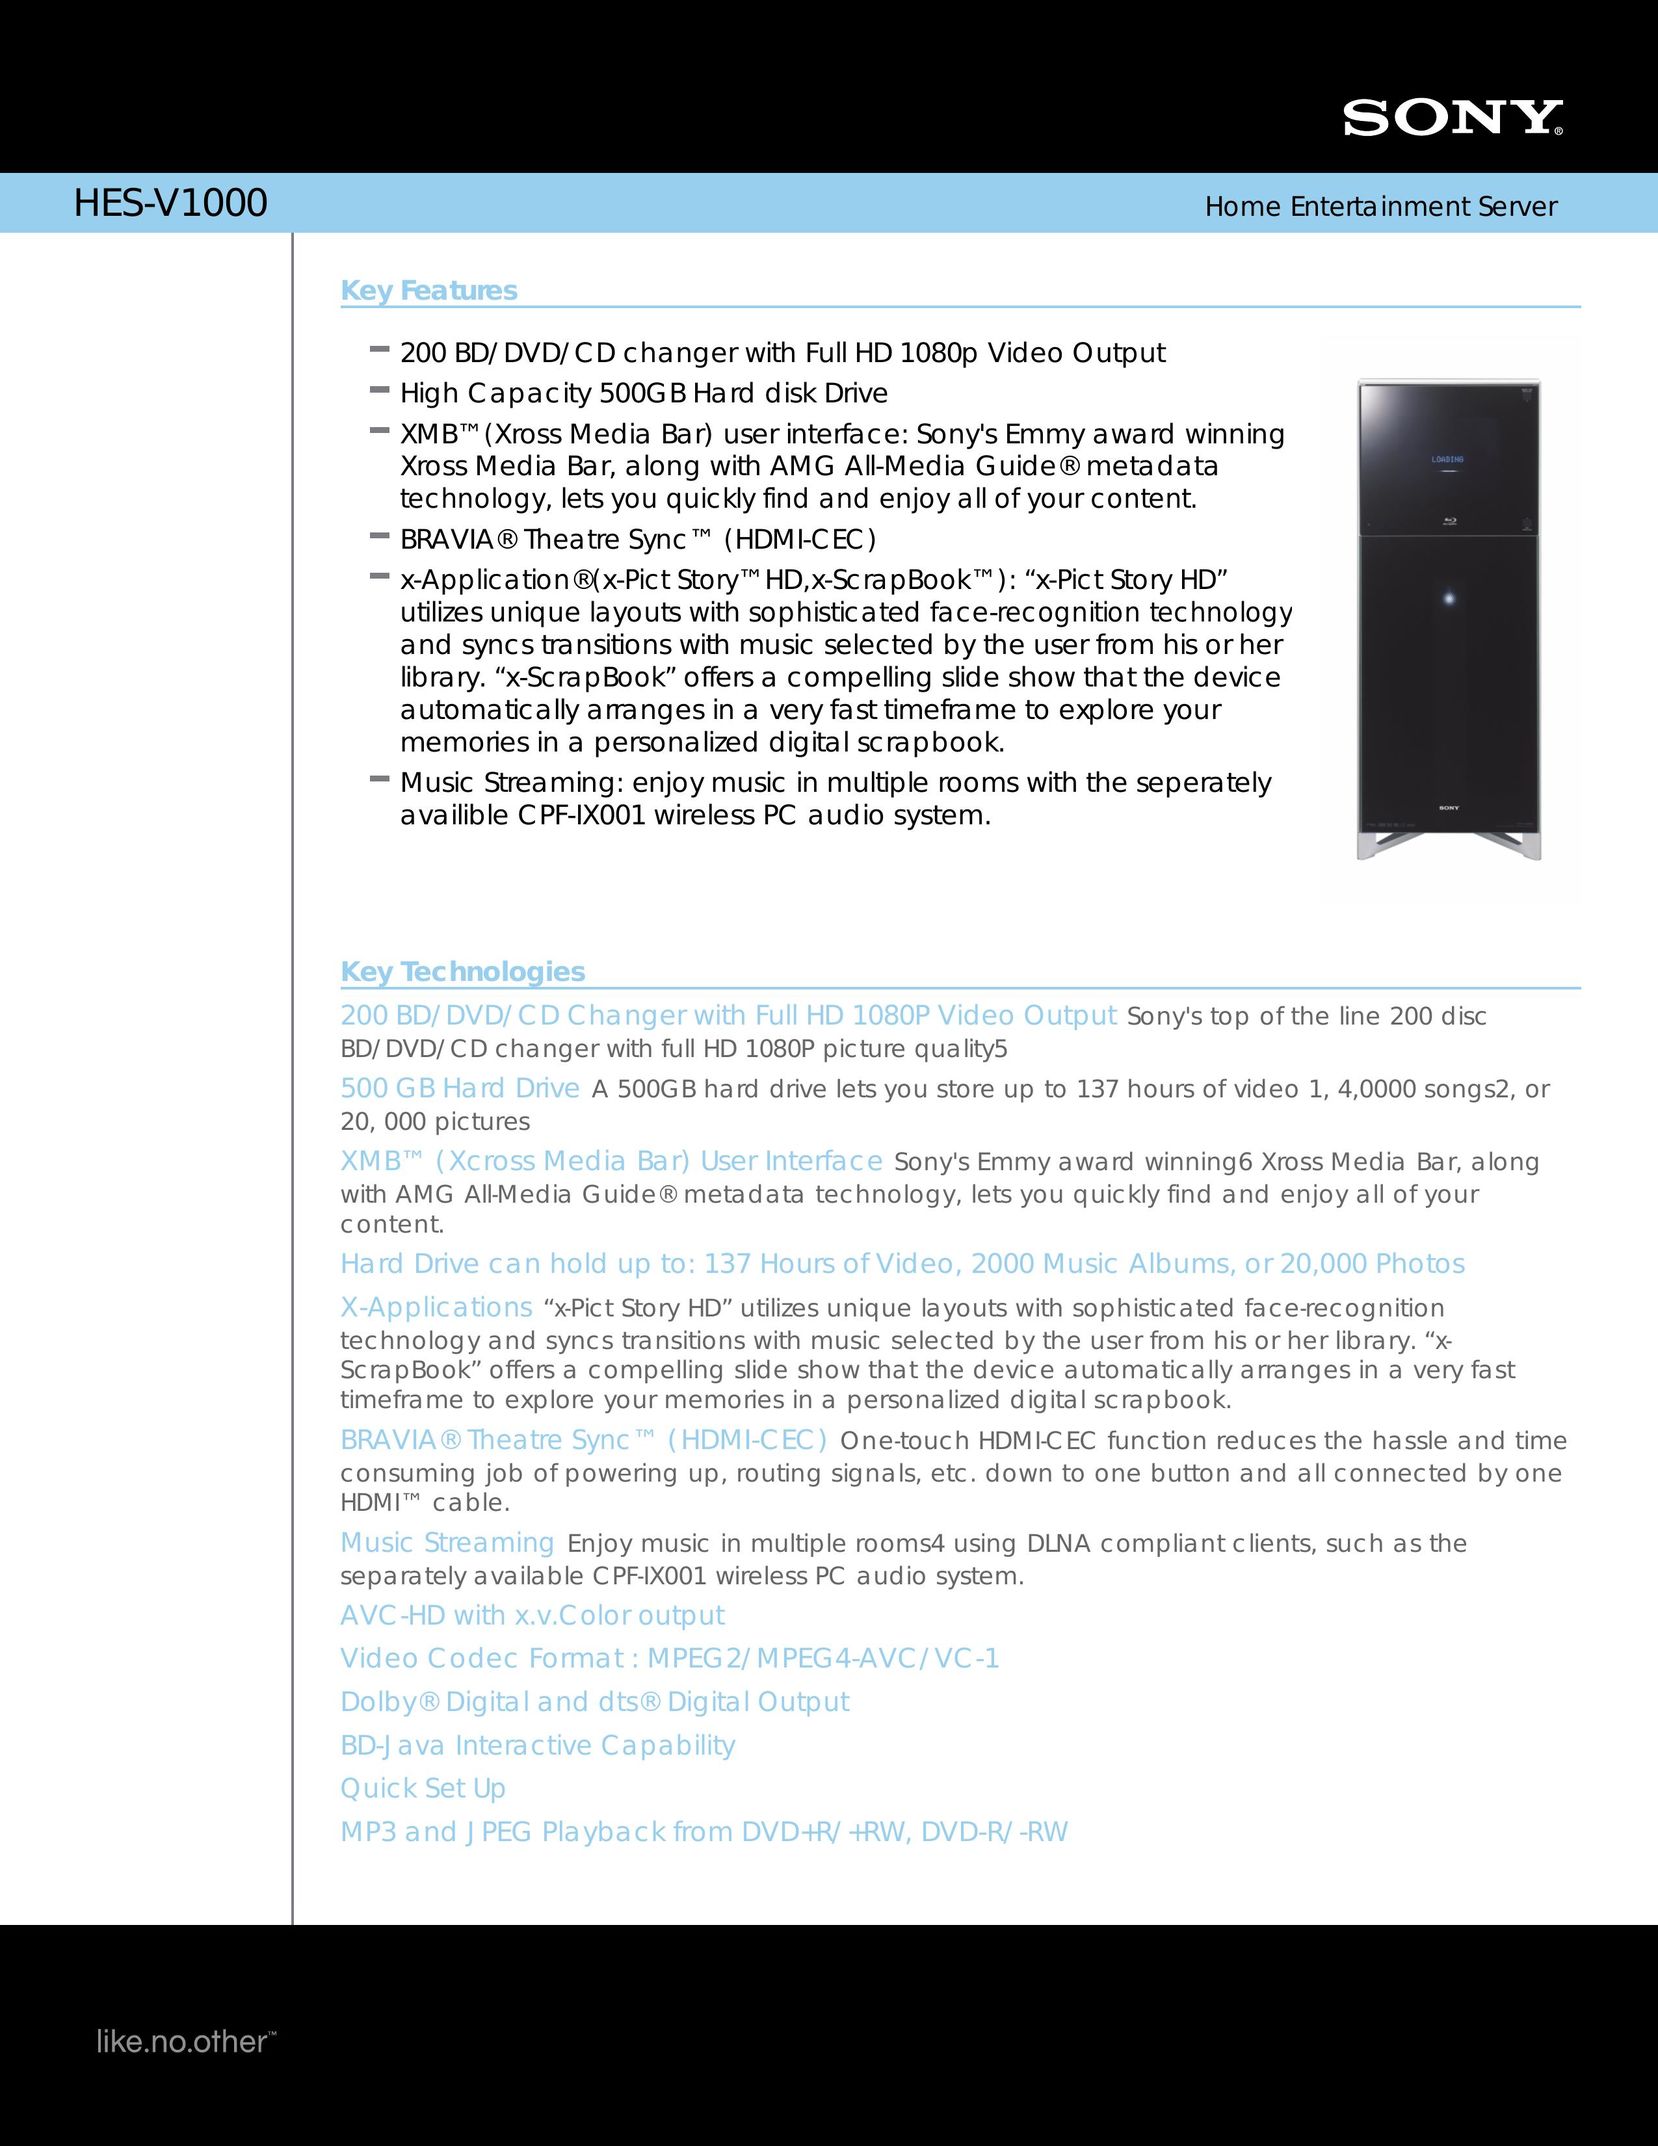 Sony HES-V1000 Home Theater Server User Manual